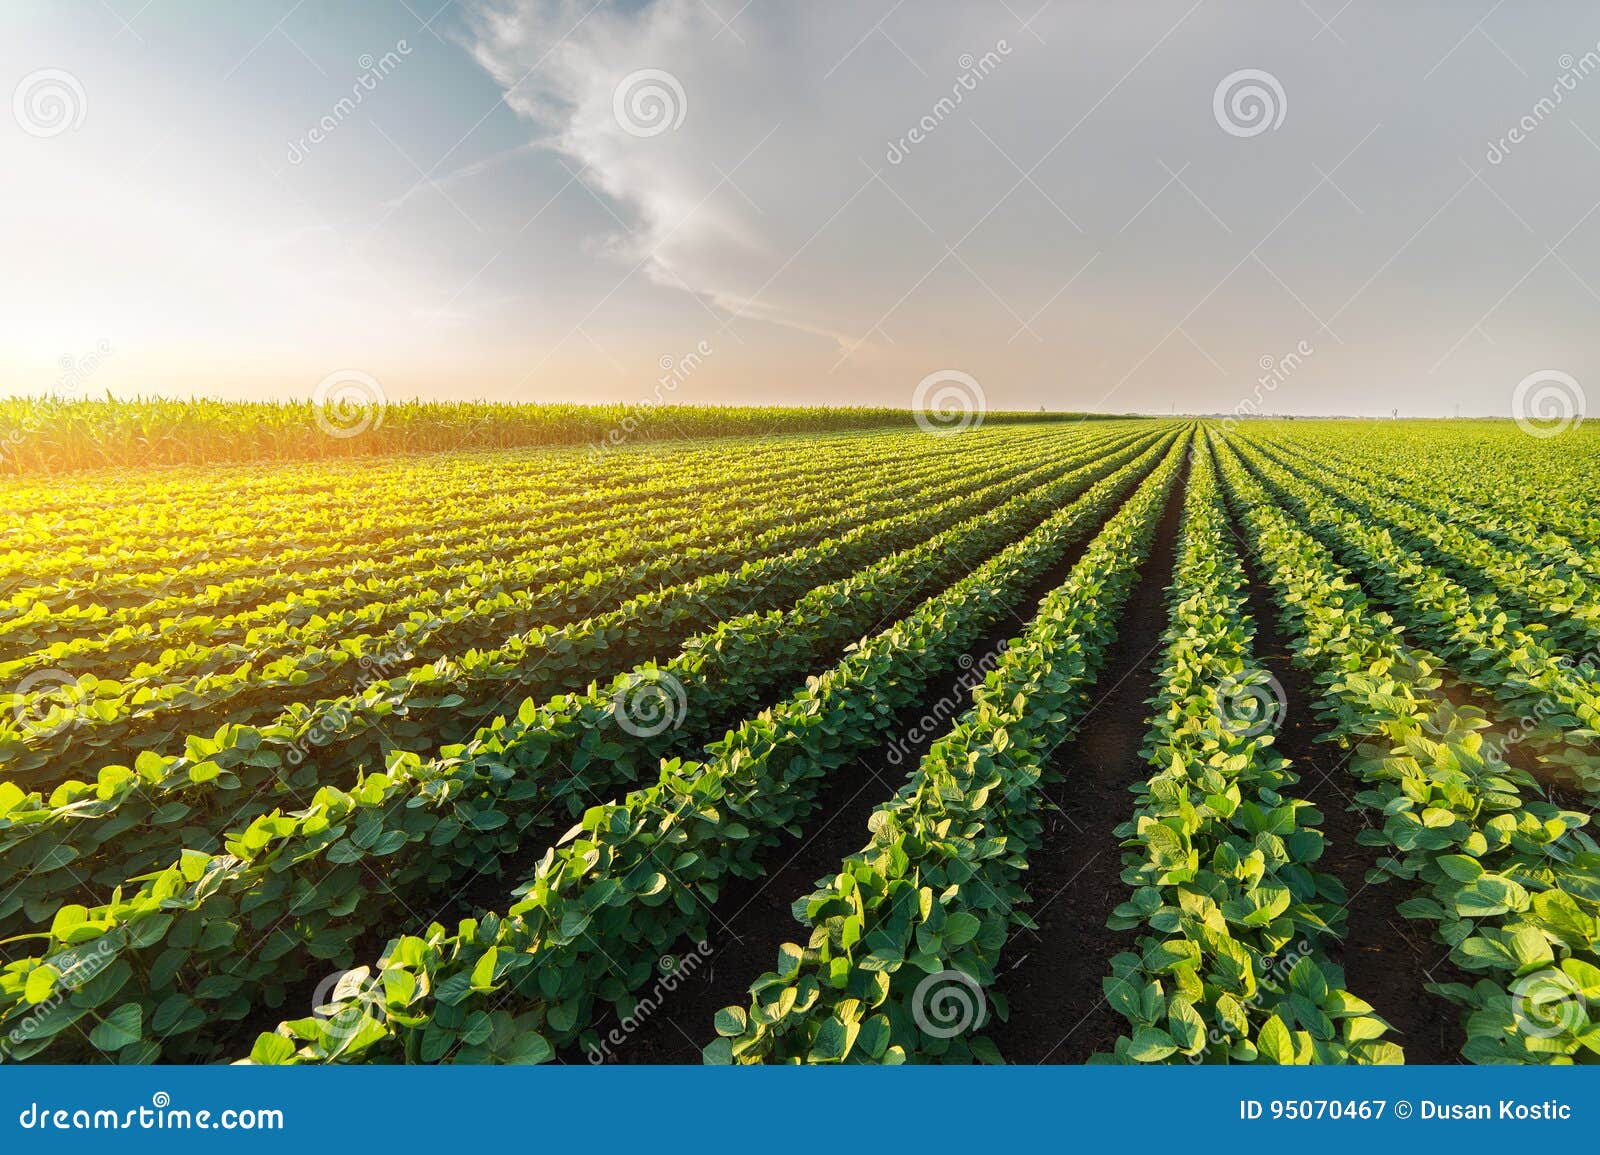 agricultural soy plantation on sunny day - green growing soybea